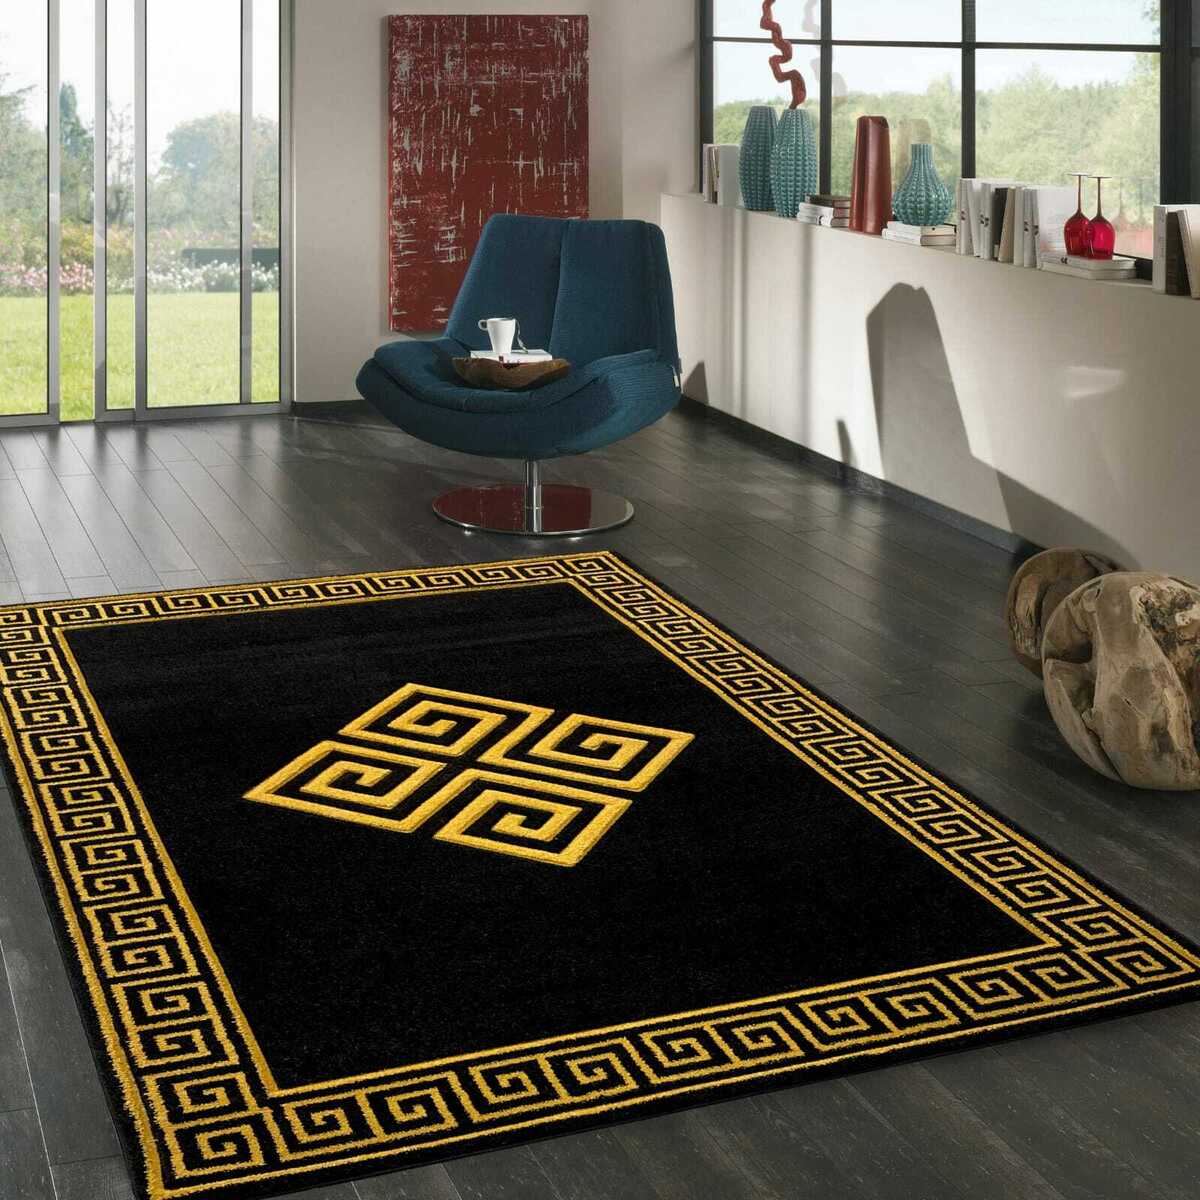 How To Build Black Rugs